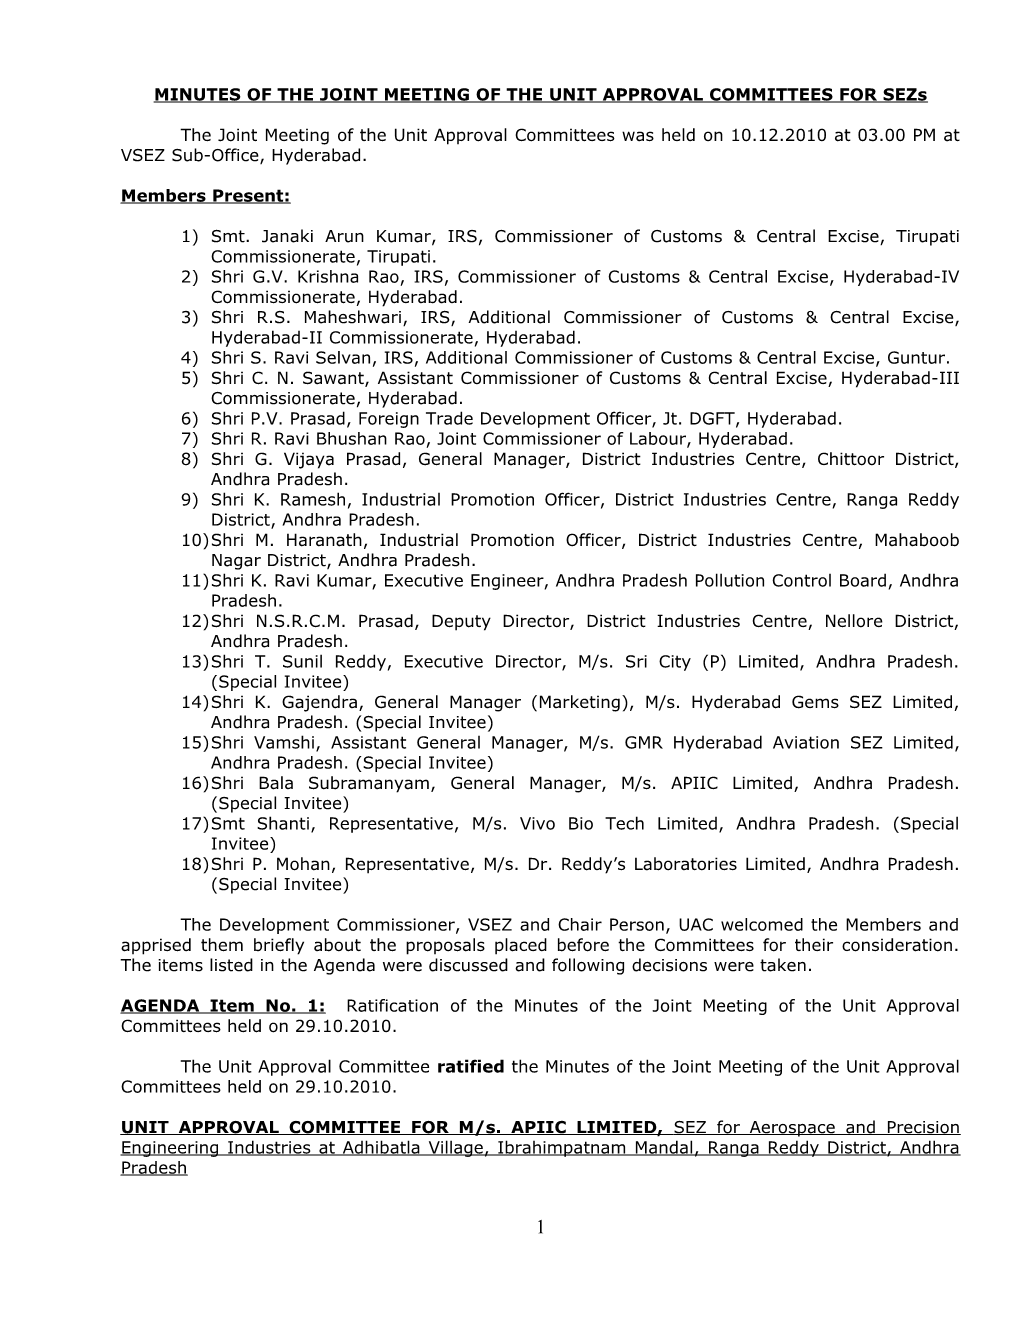 MINUTES of the JOINT MEETING of the UNIT APPROVAL COMMITTEES for Sezs